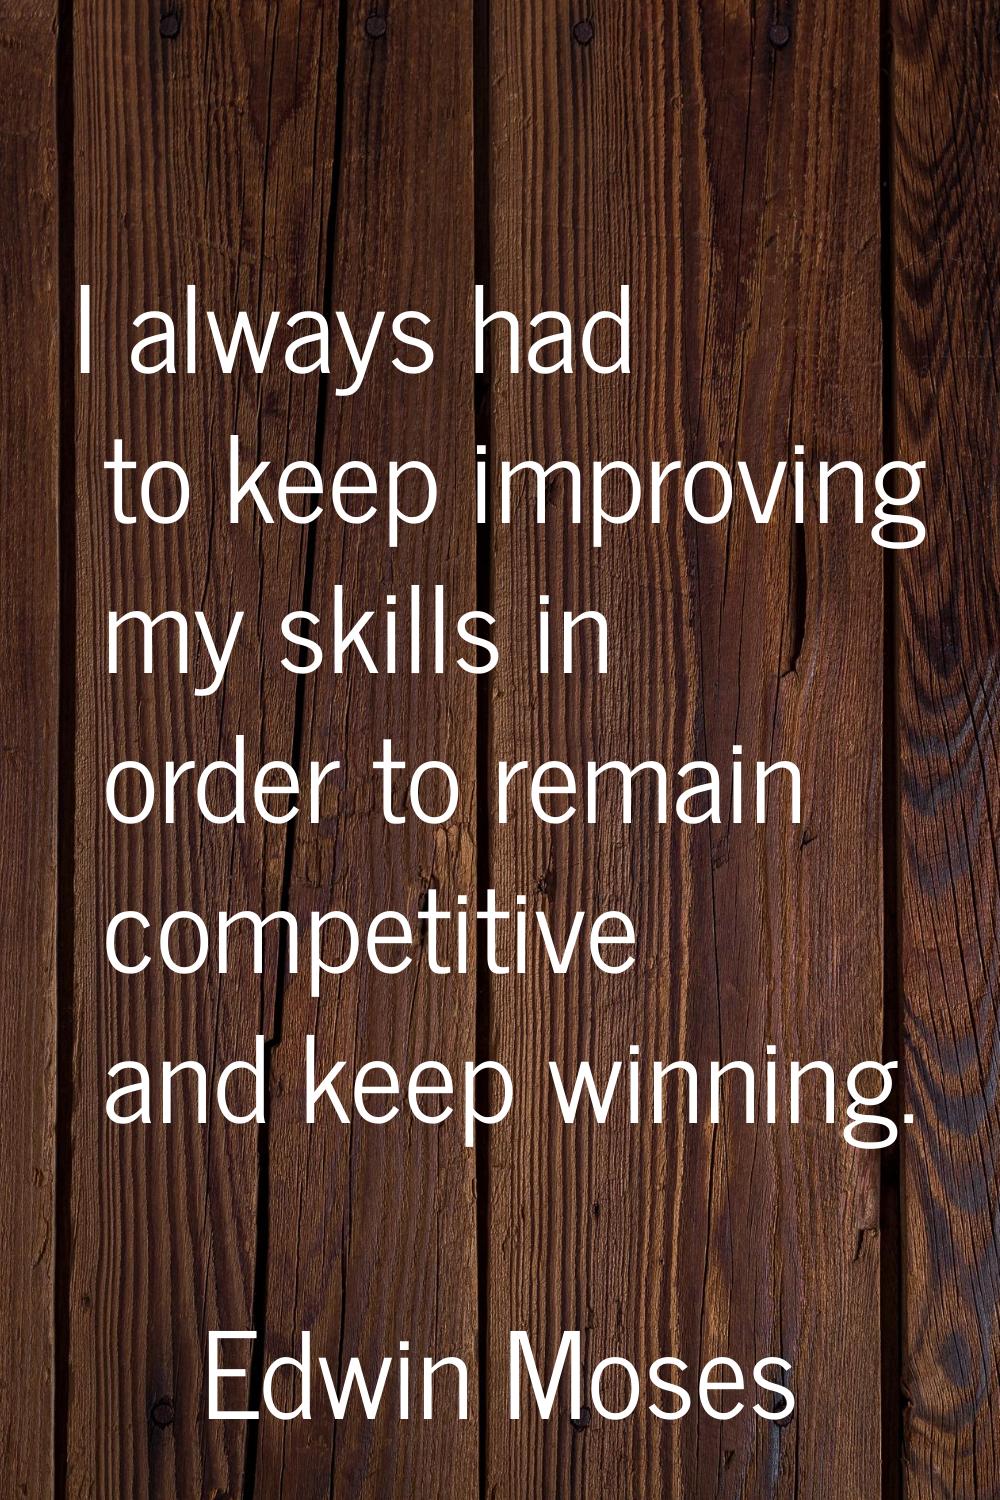 I always had to keep improving my skills in order to remain competitive and keep winning.